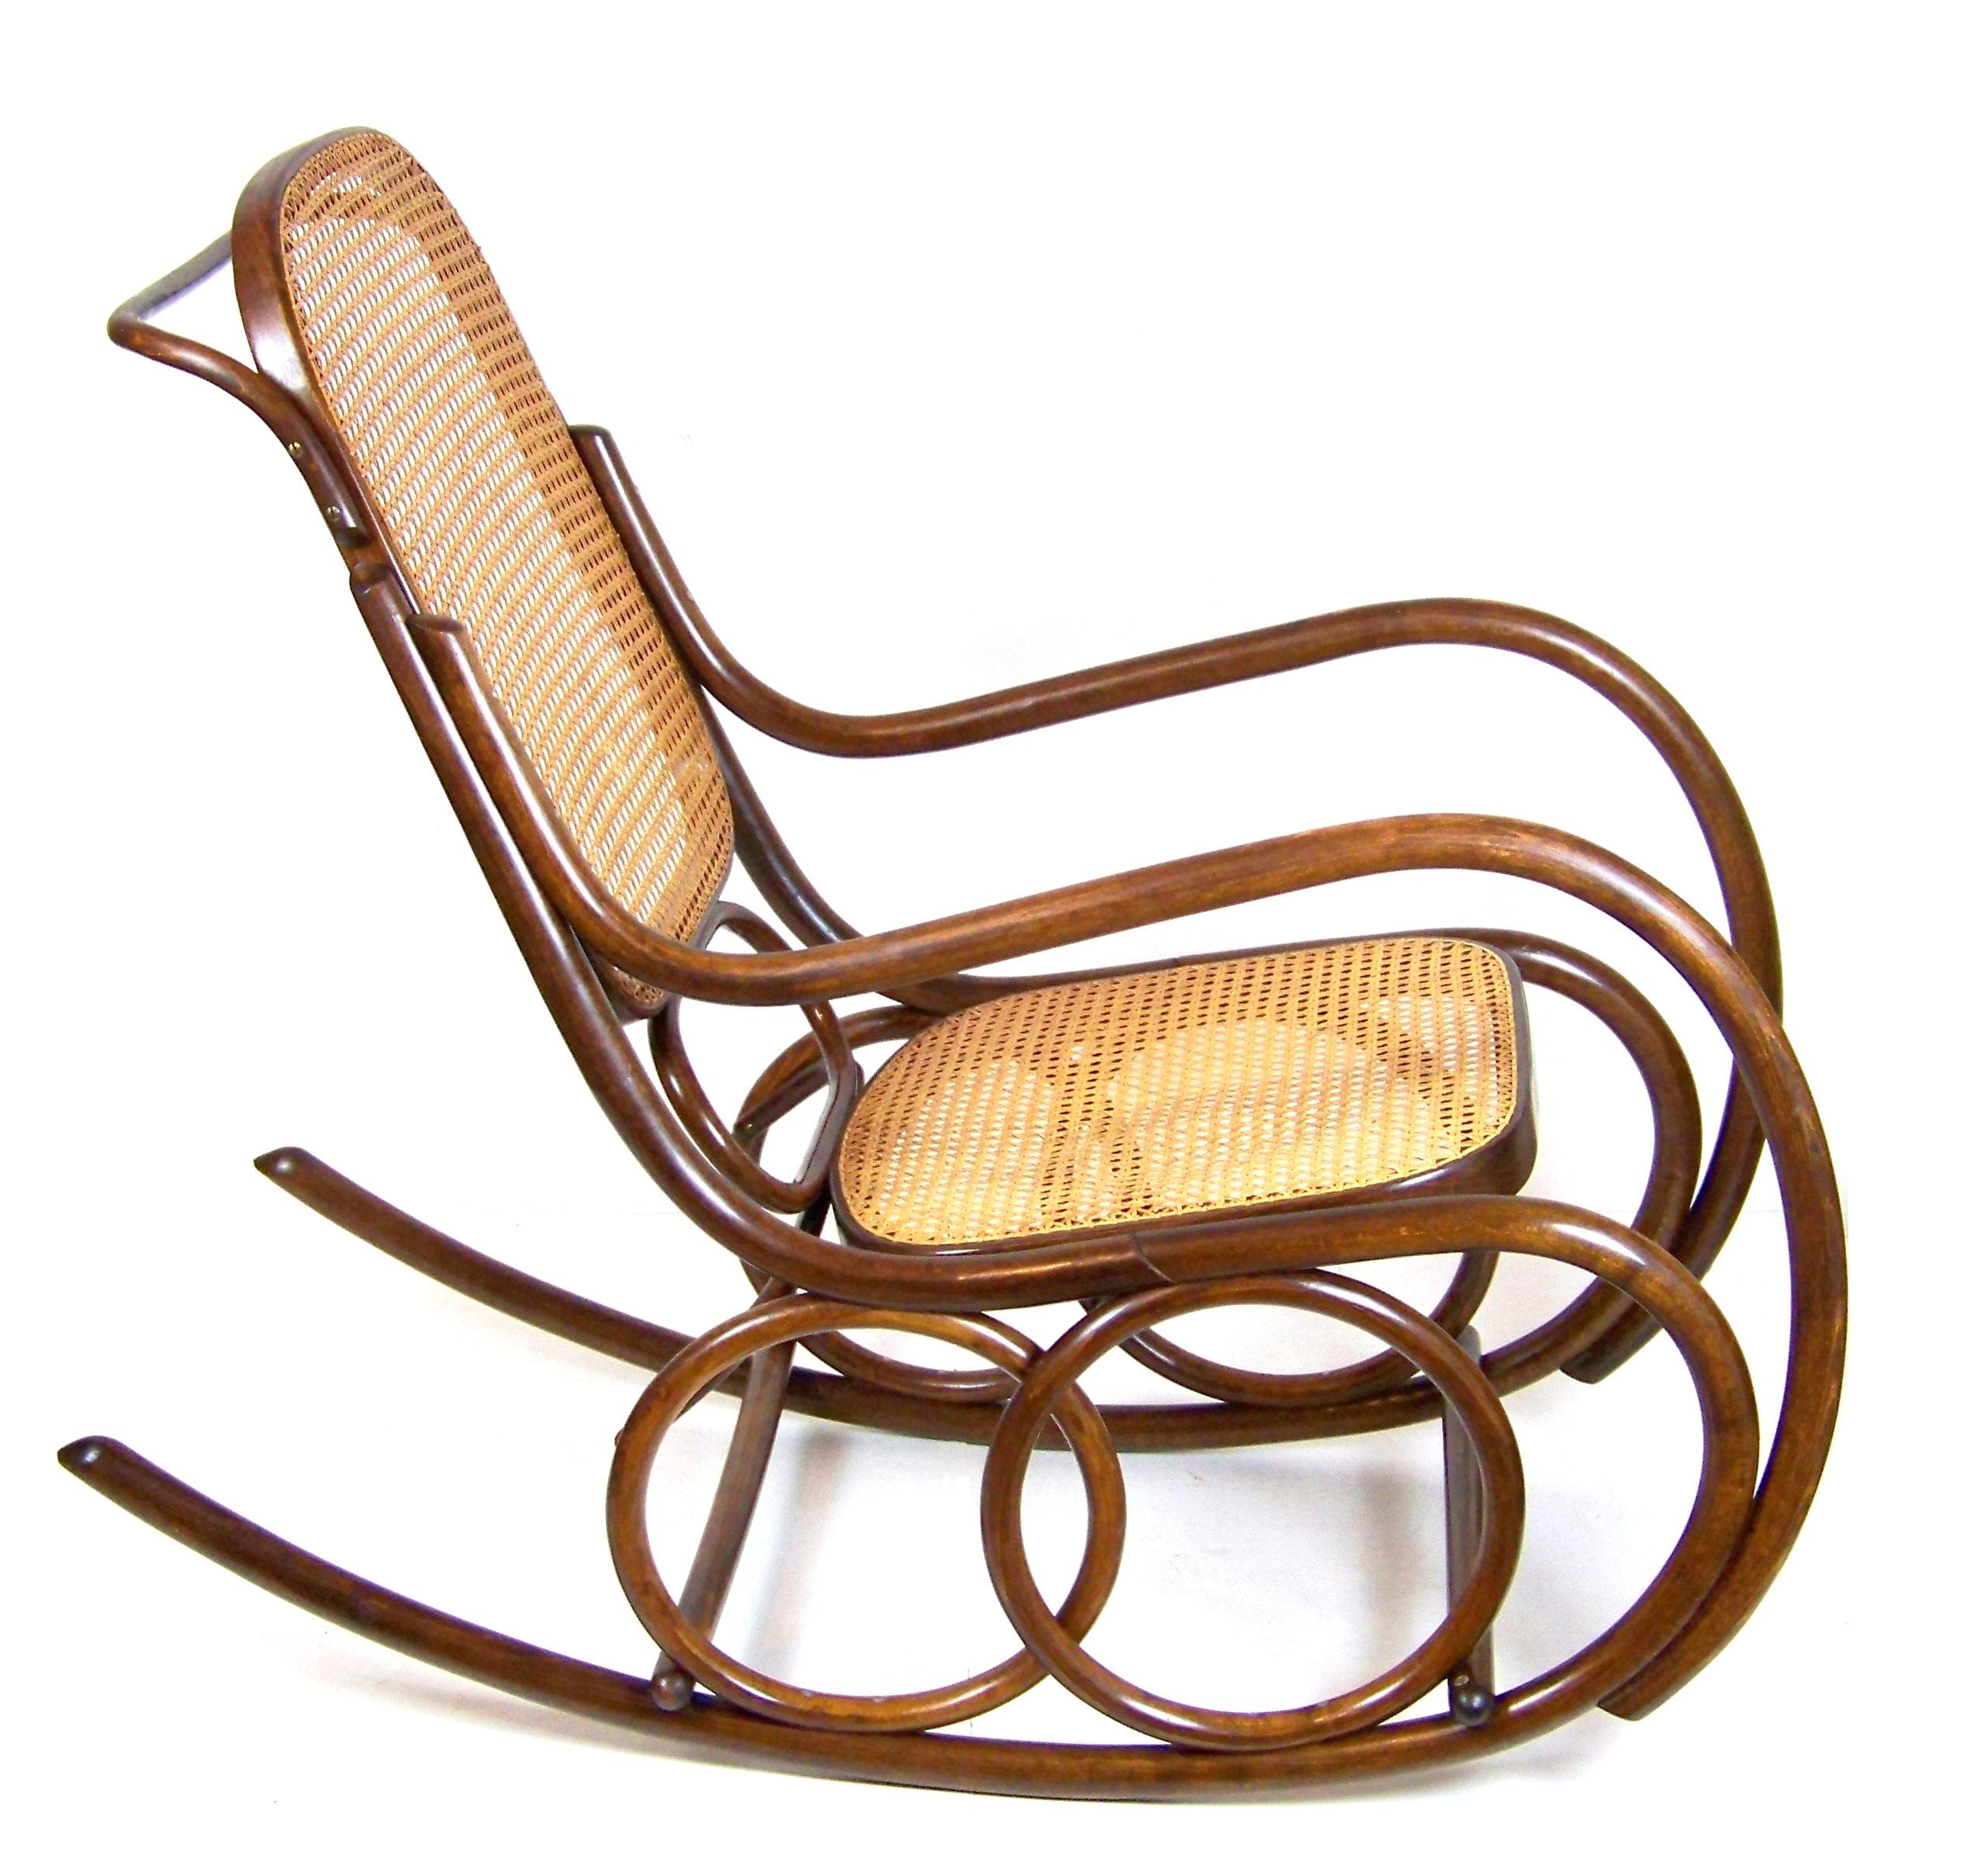 Midcentury rocking chair made of bentwood by TON from 1960s.